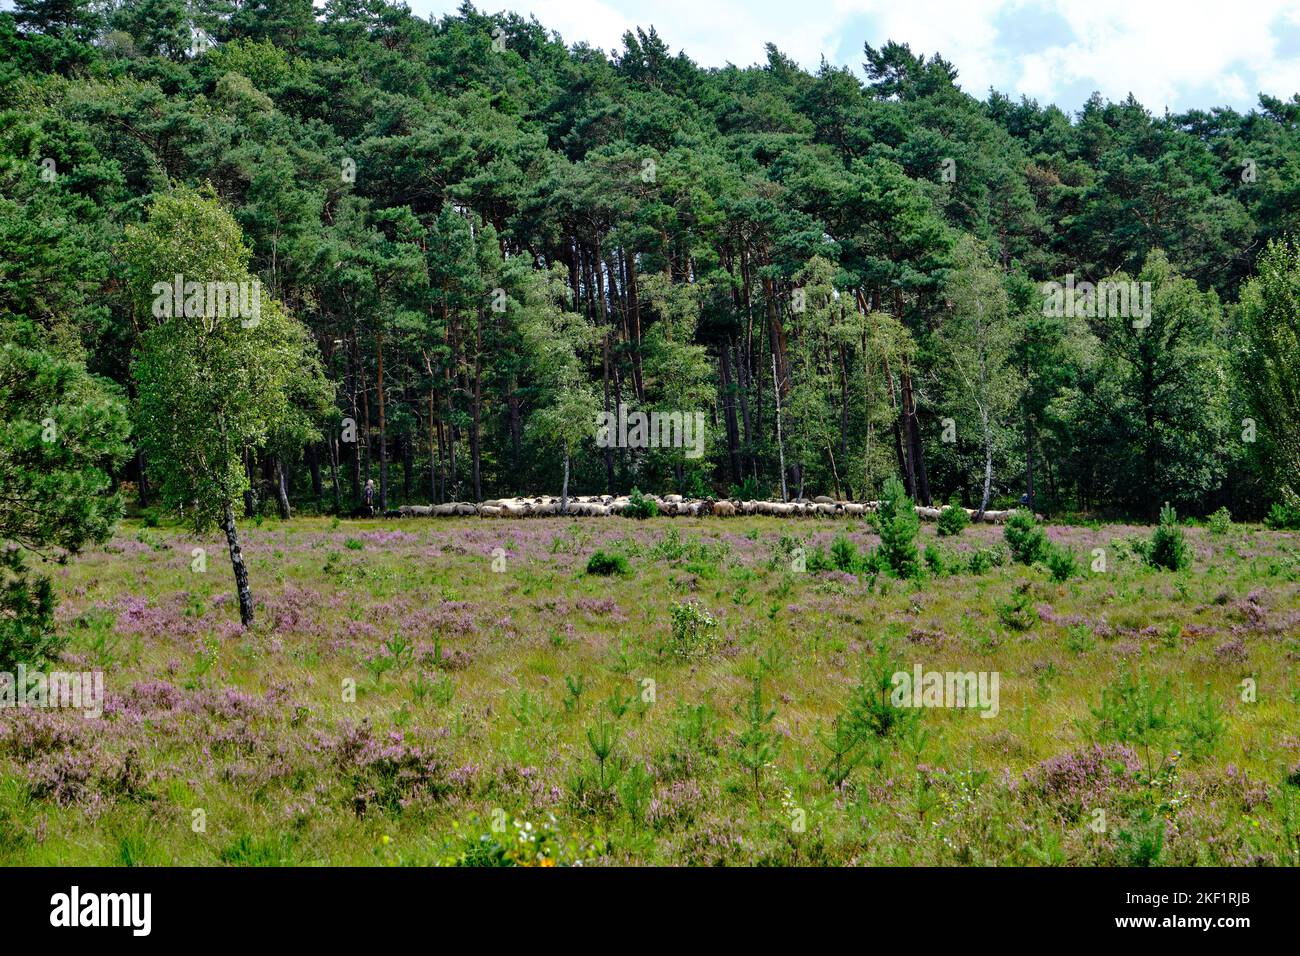 A herd of Schoonebeker Sheep on the forest edge with a border collie dog on the Brunssummerheide, the Netherlands. August 2021 Stock Photo